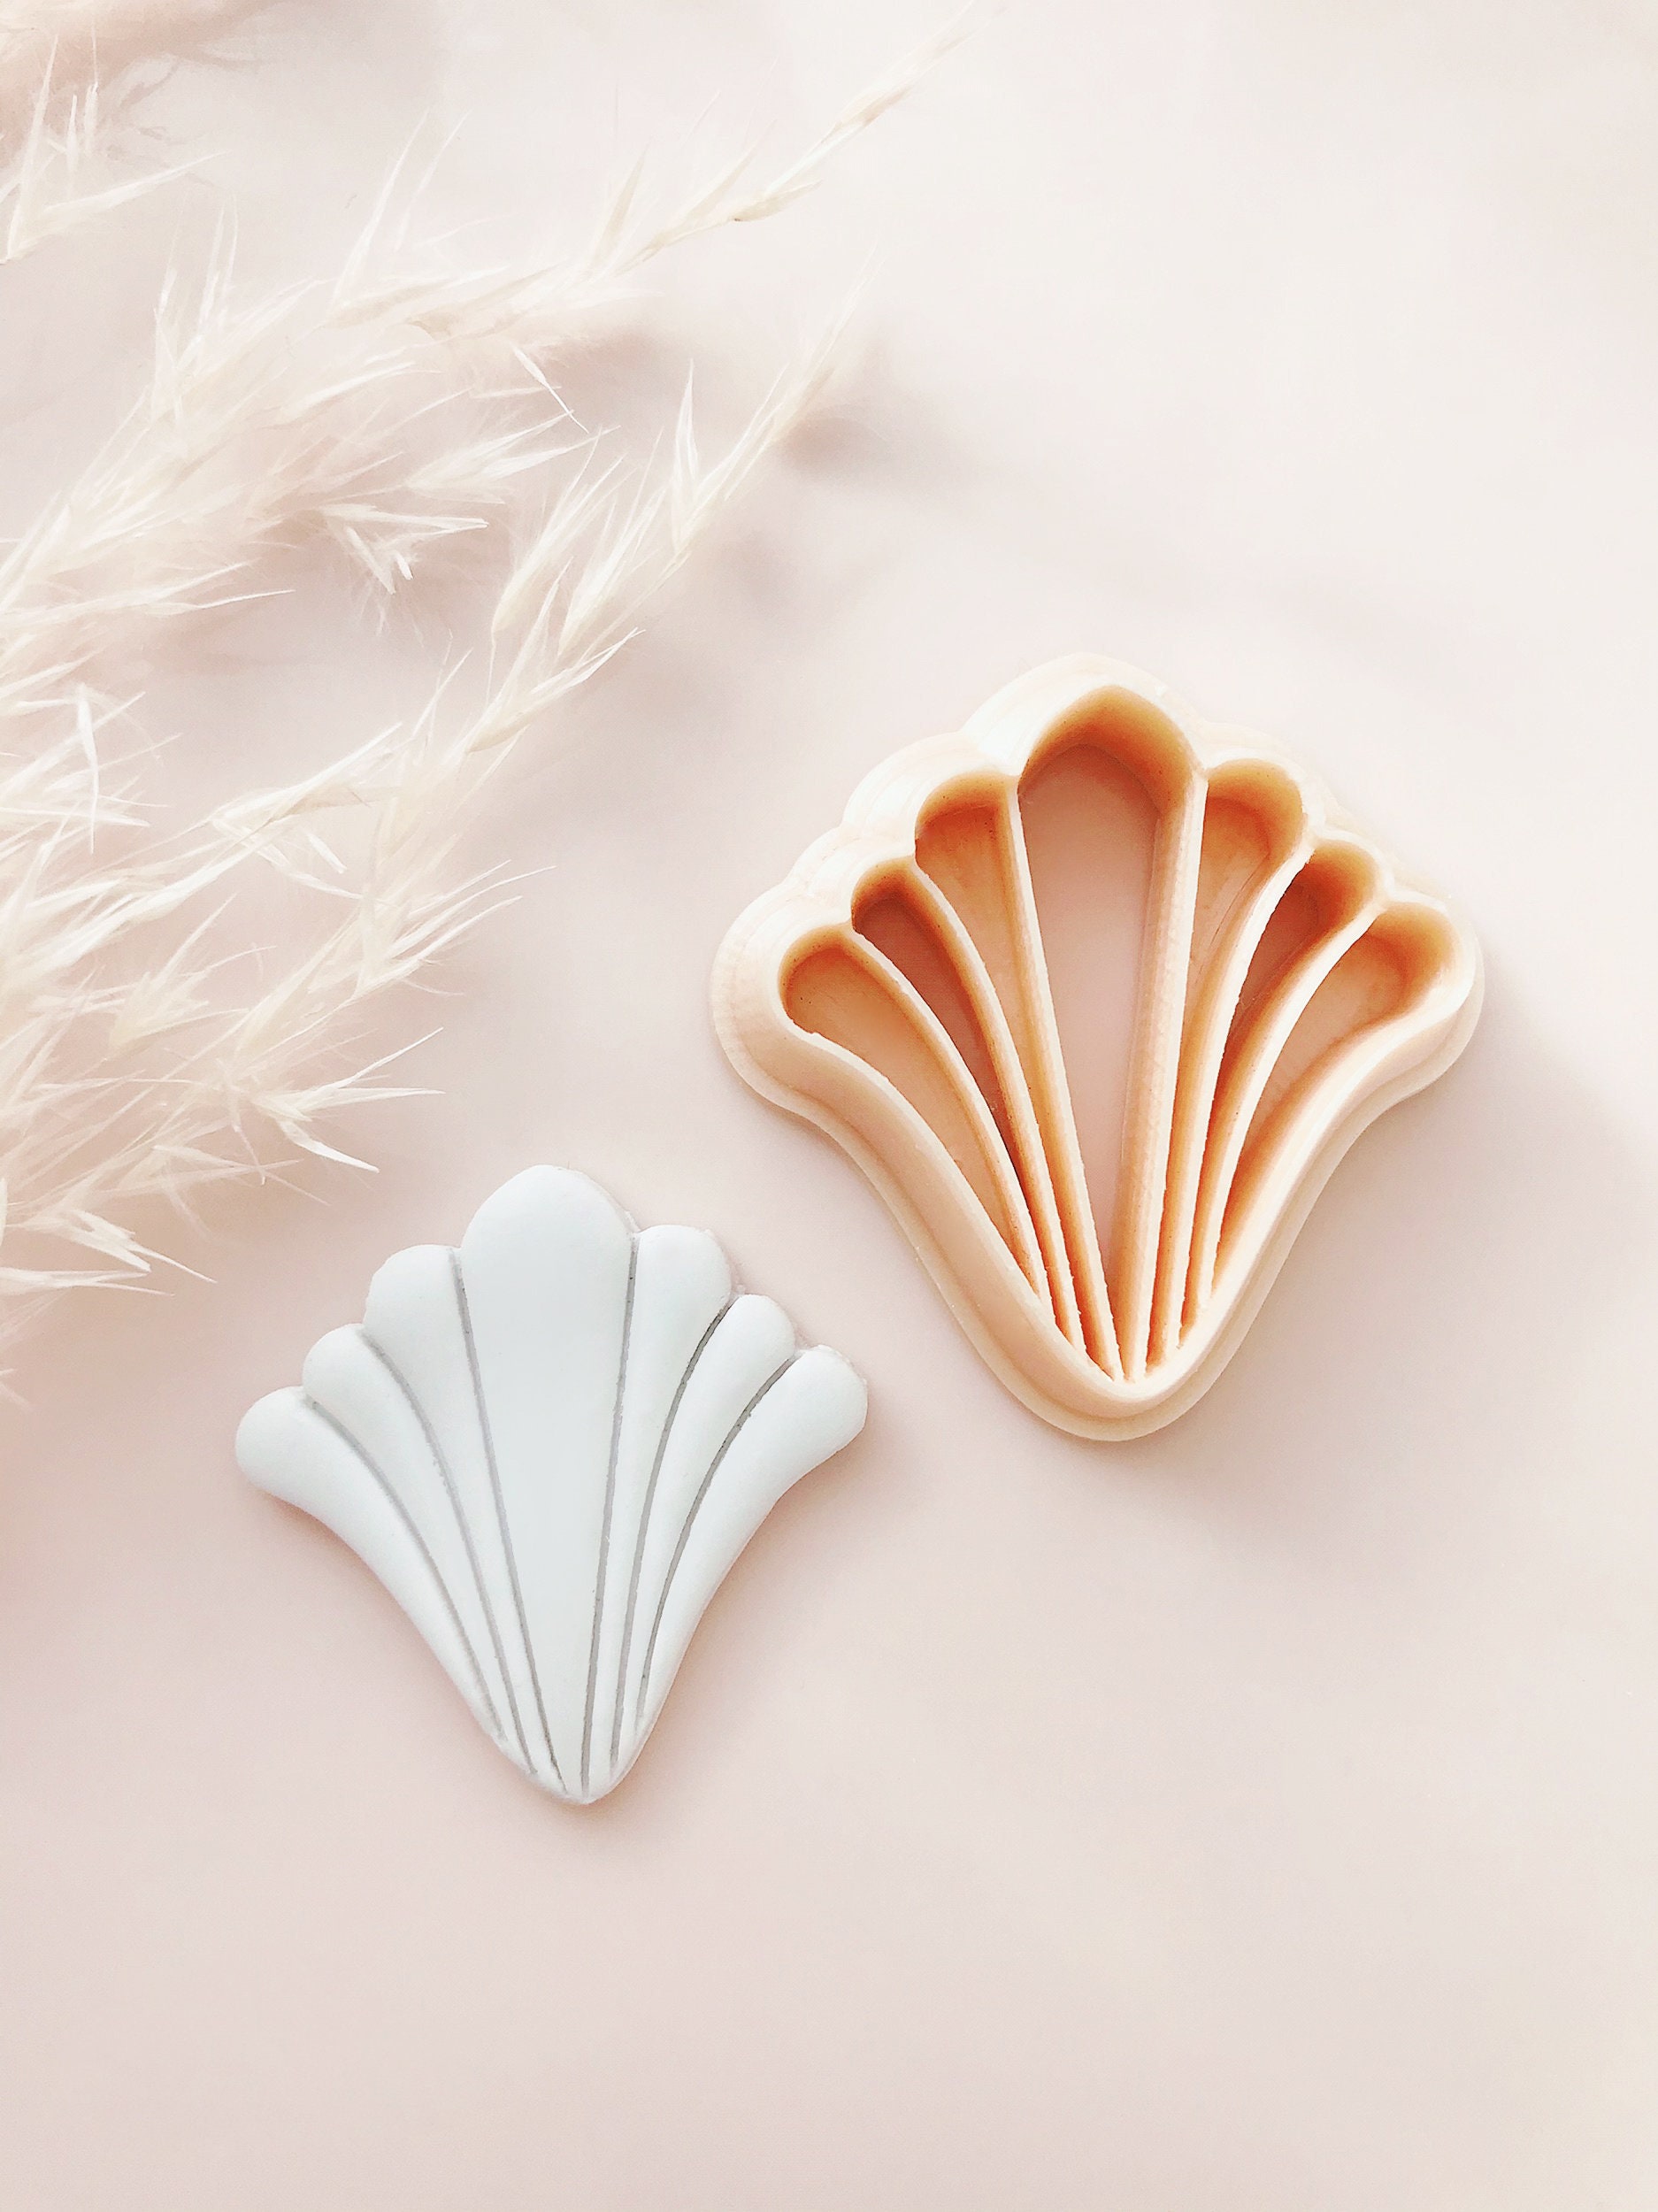 Wheat Polymer Clay Stamps - Polymer Clay Tools